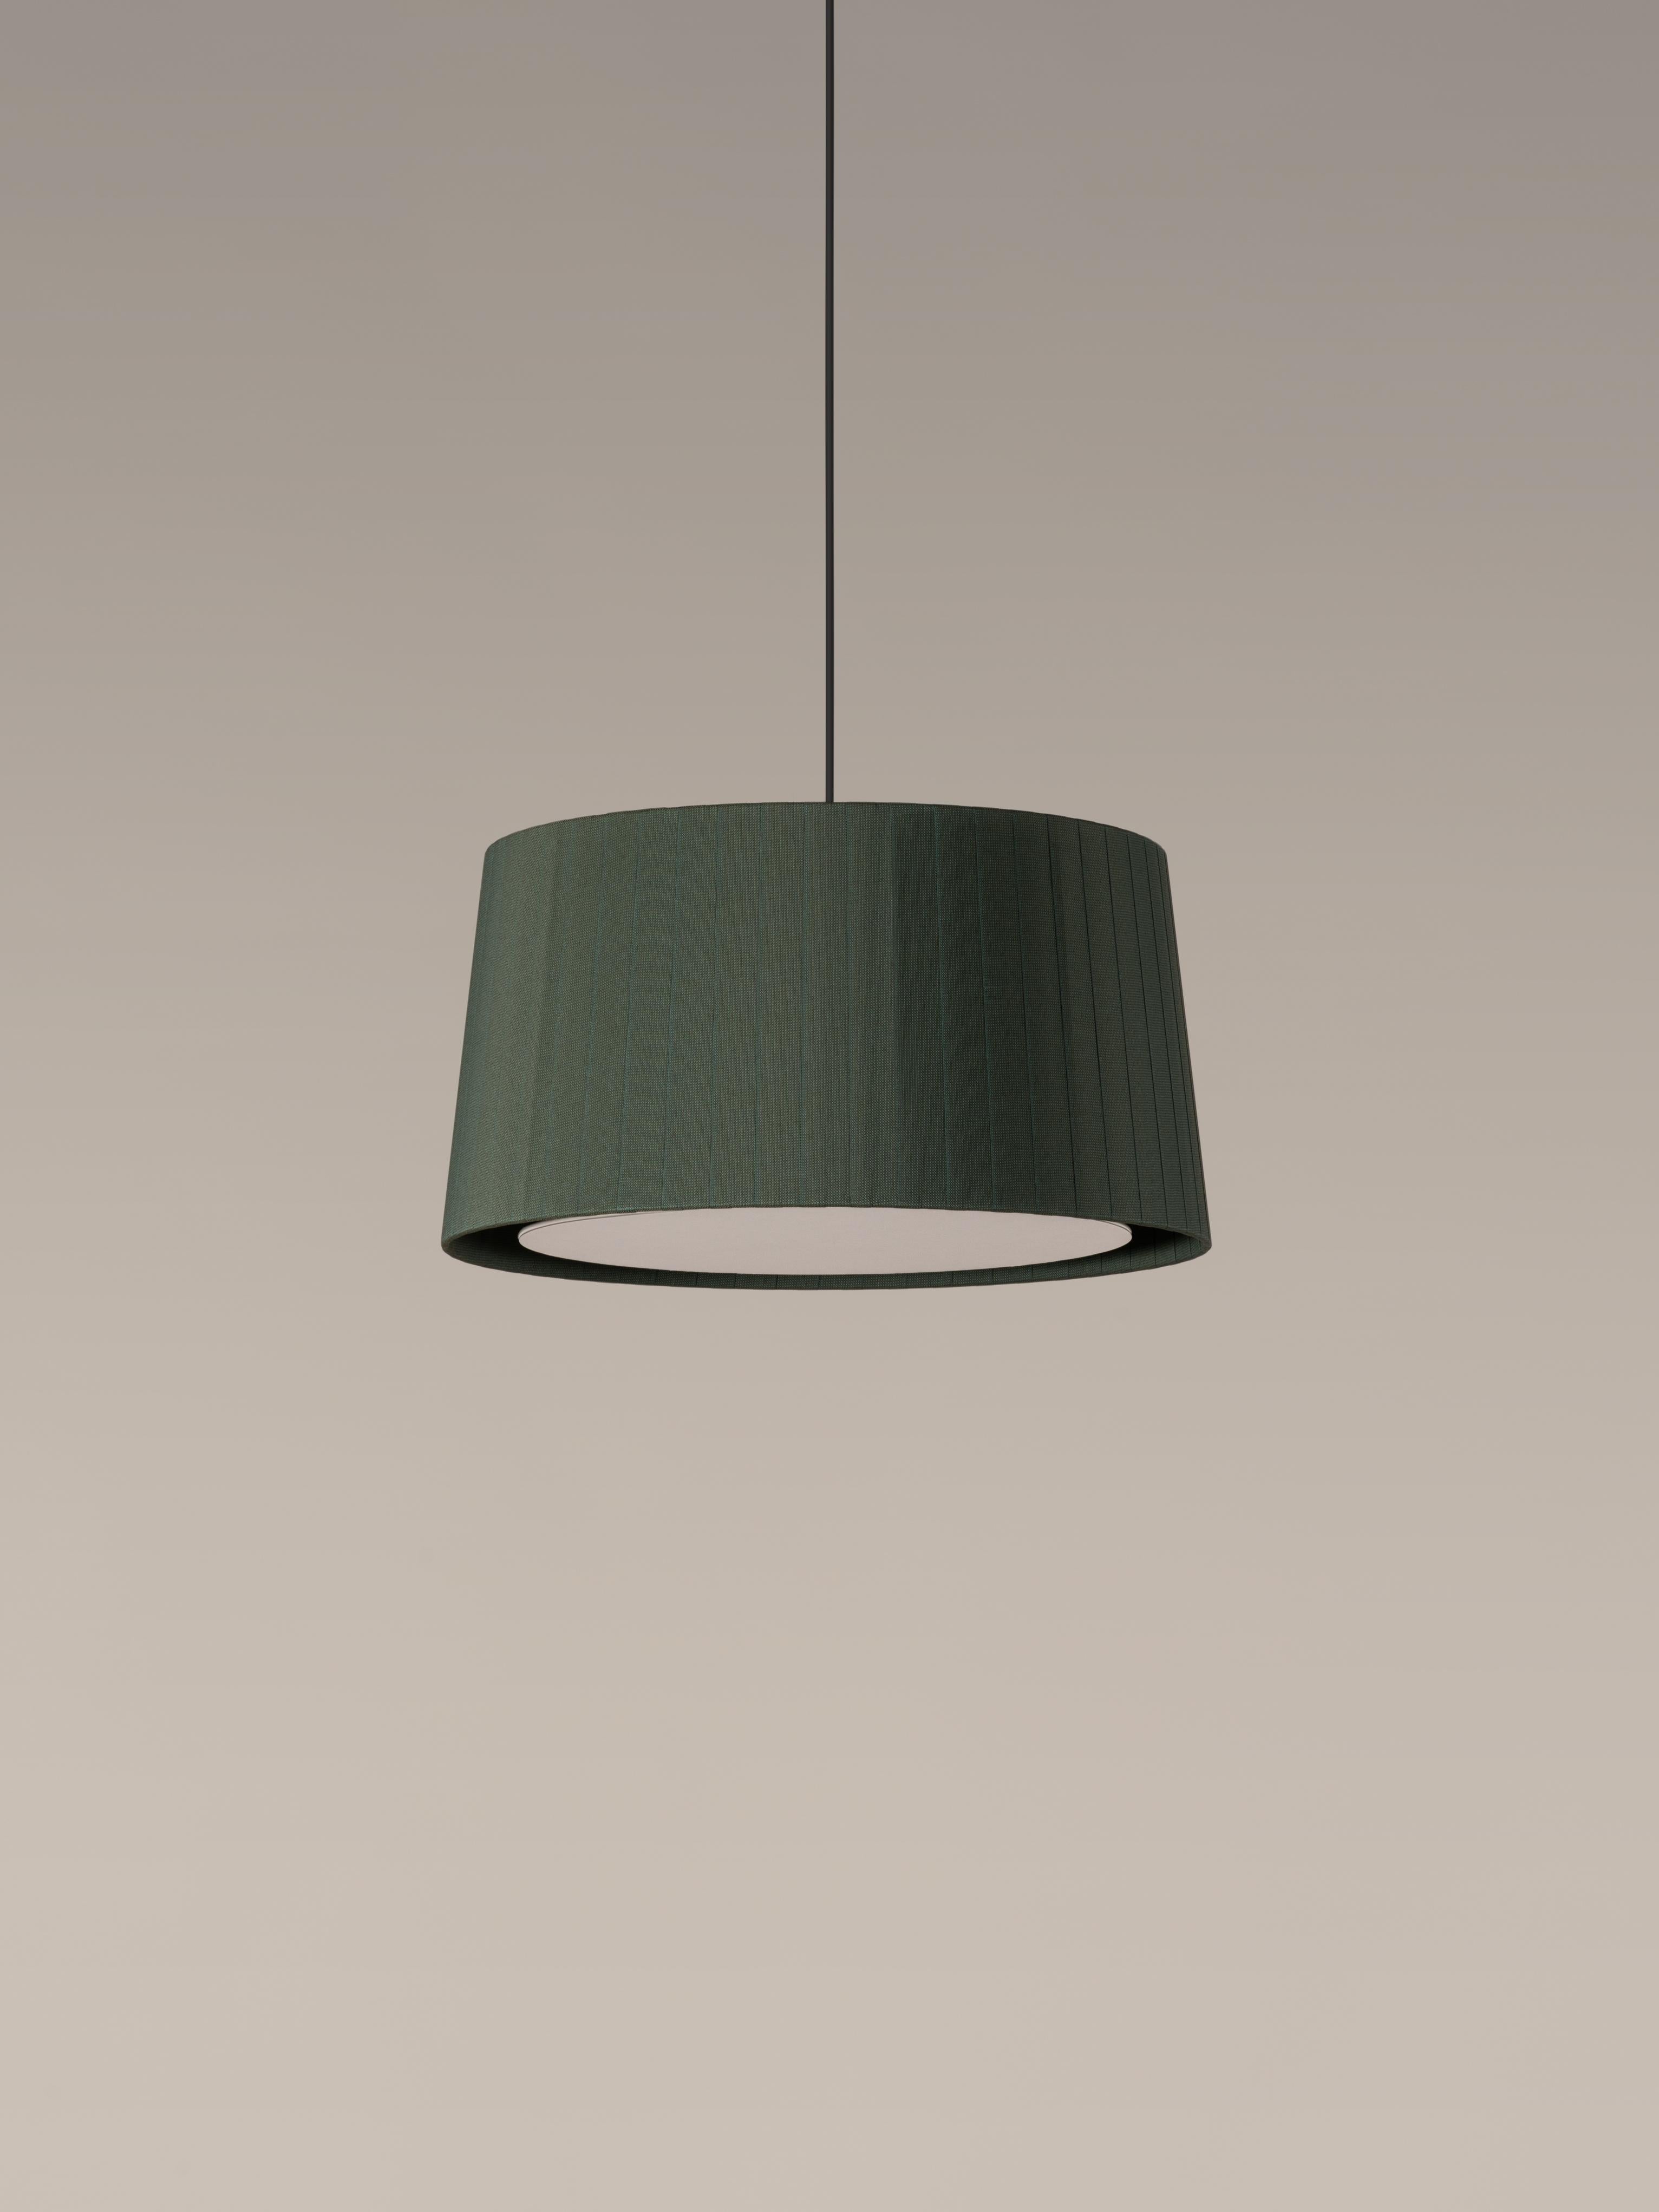 Green GT6 pendant lamp by Santa & Cole
Dimensions: D 45 x H 23 cm
Materials: Metal, ribbon.
Available in other colors. Available in 2 lights version.

Designed for intermediate volumes and household areas, GT5 and GT6 are hanging lamps with